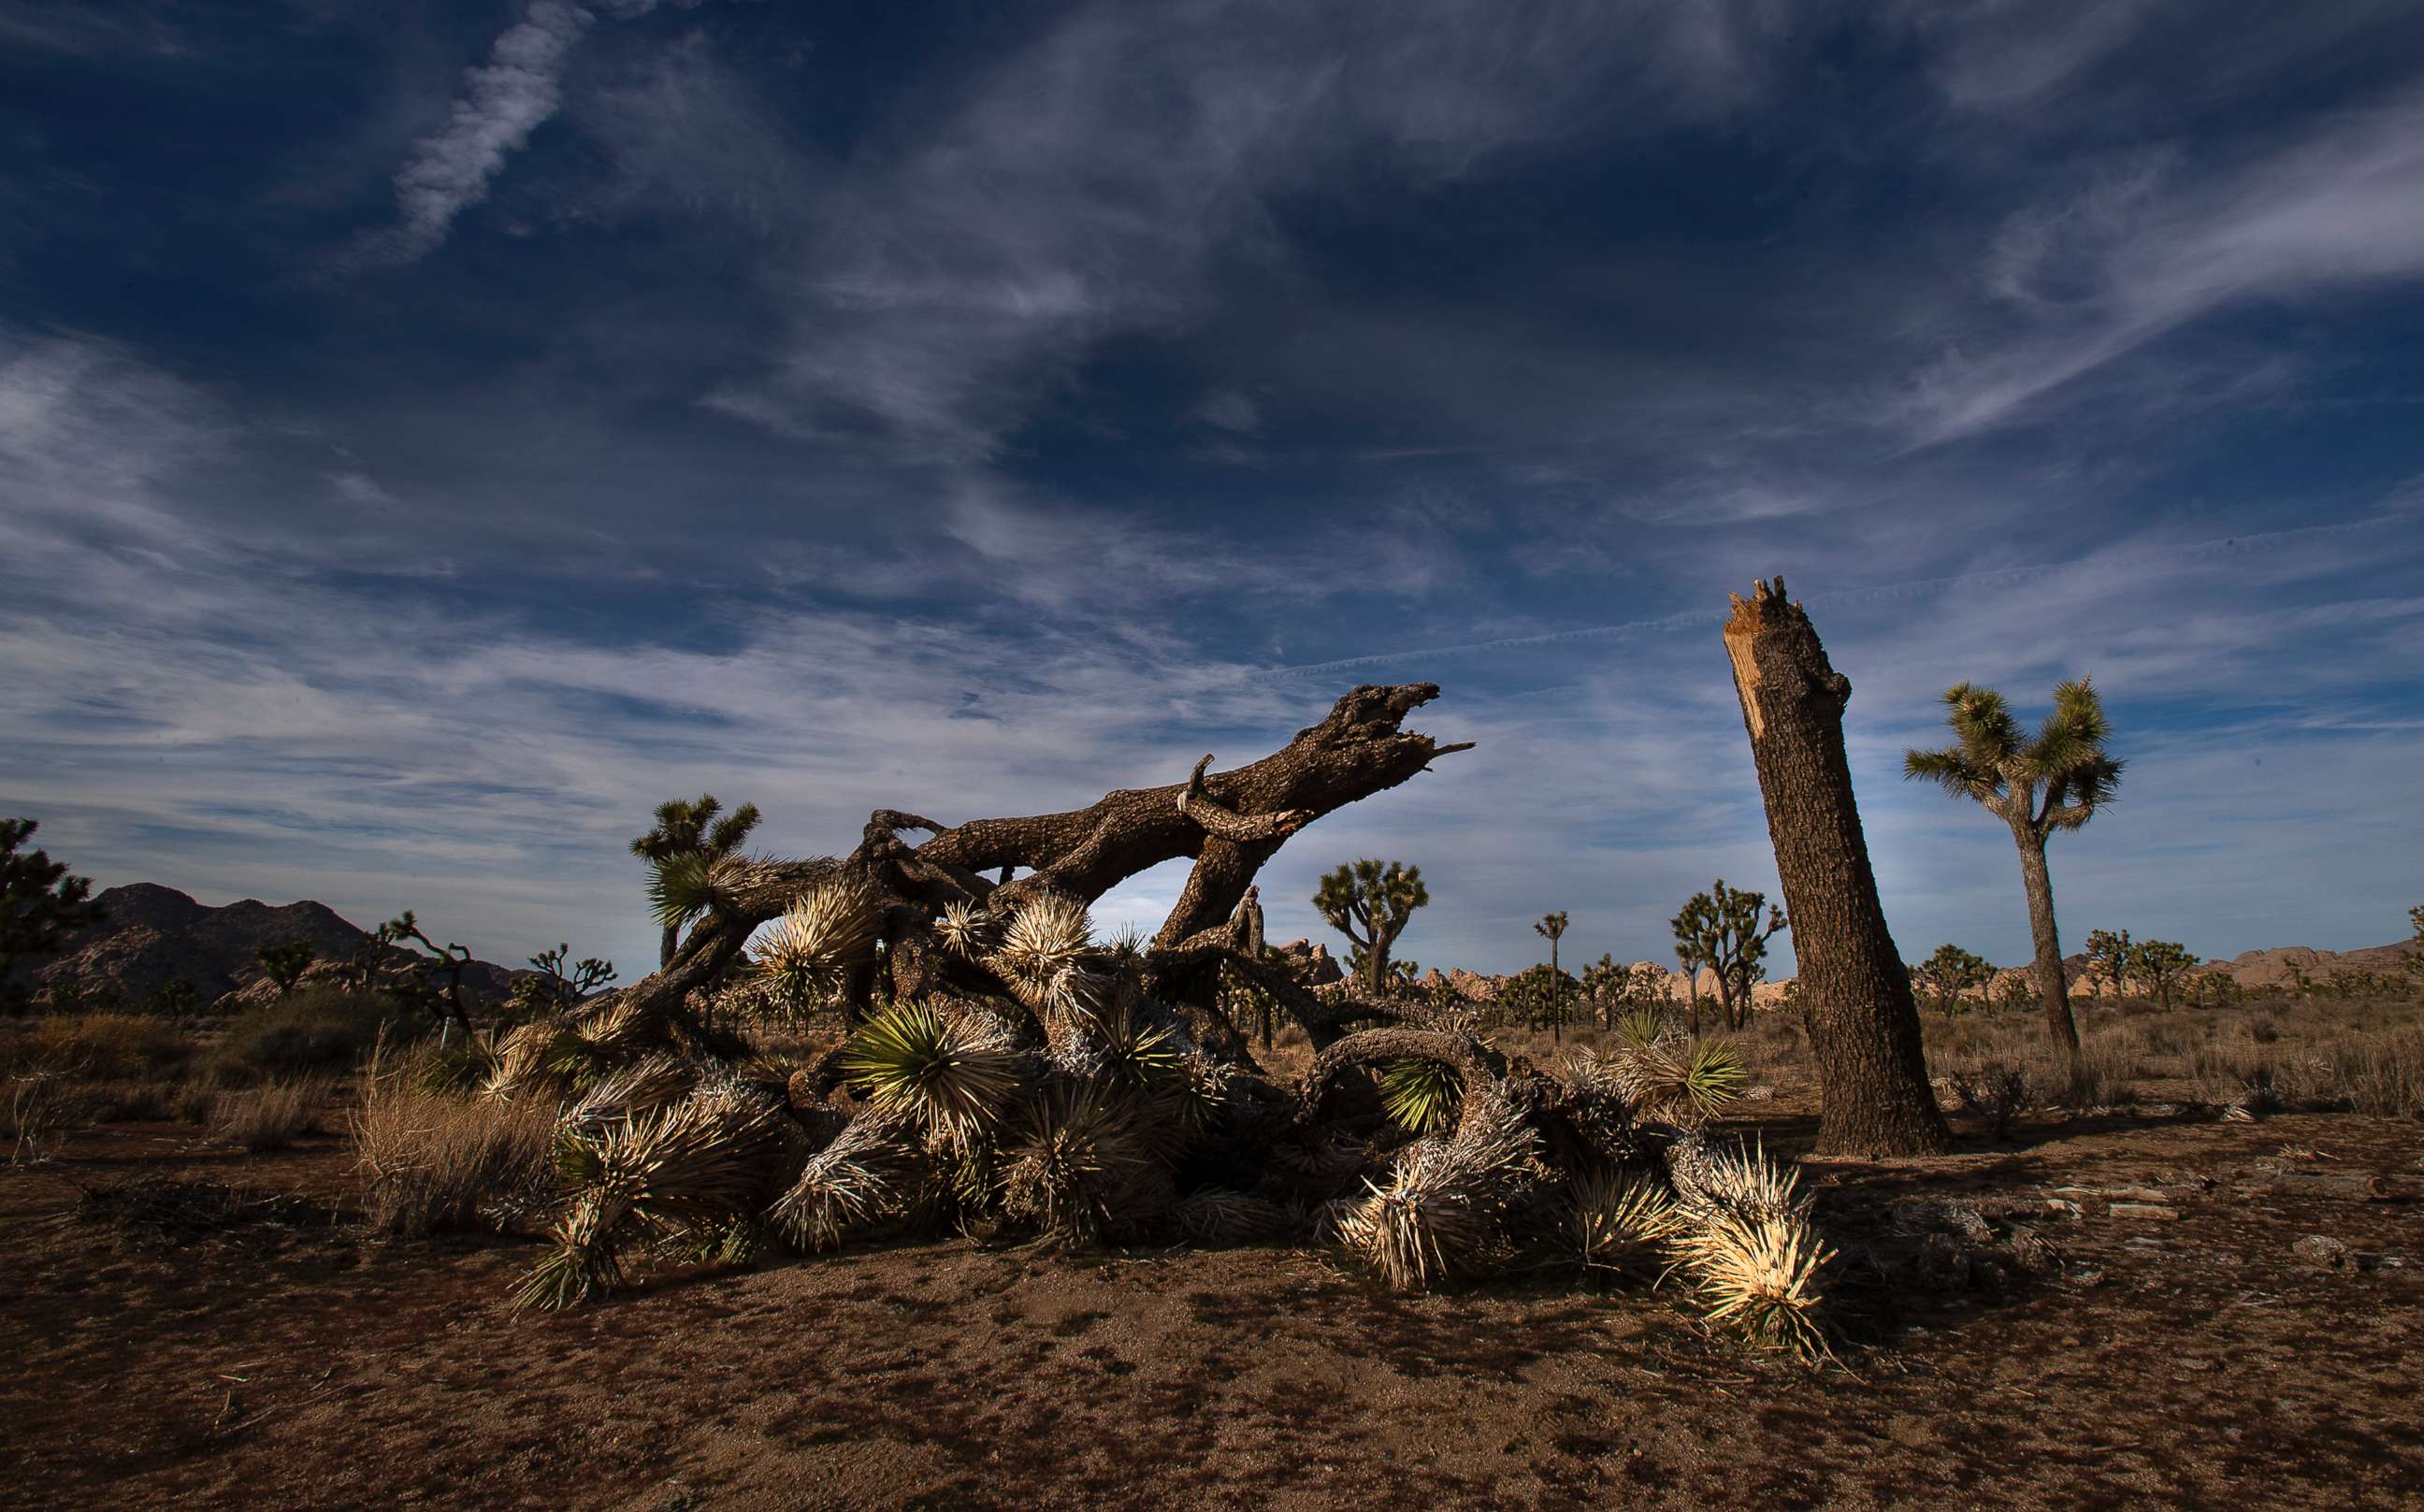 PHOTO: A once vibrant Joshua Tree has been severed in half in an act of vandalism in Joshua Tree National Park on Jan. 8, 2019 in Joshua Tree, Calif.